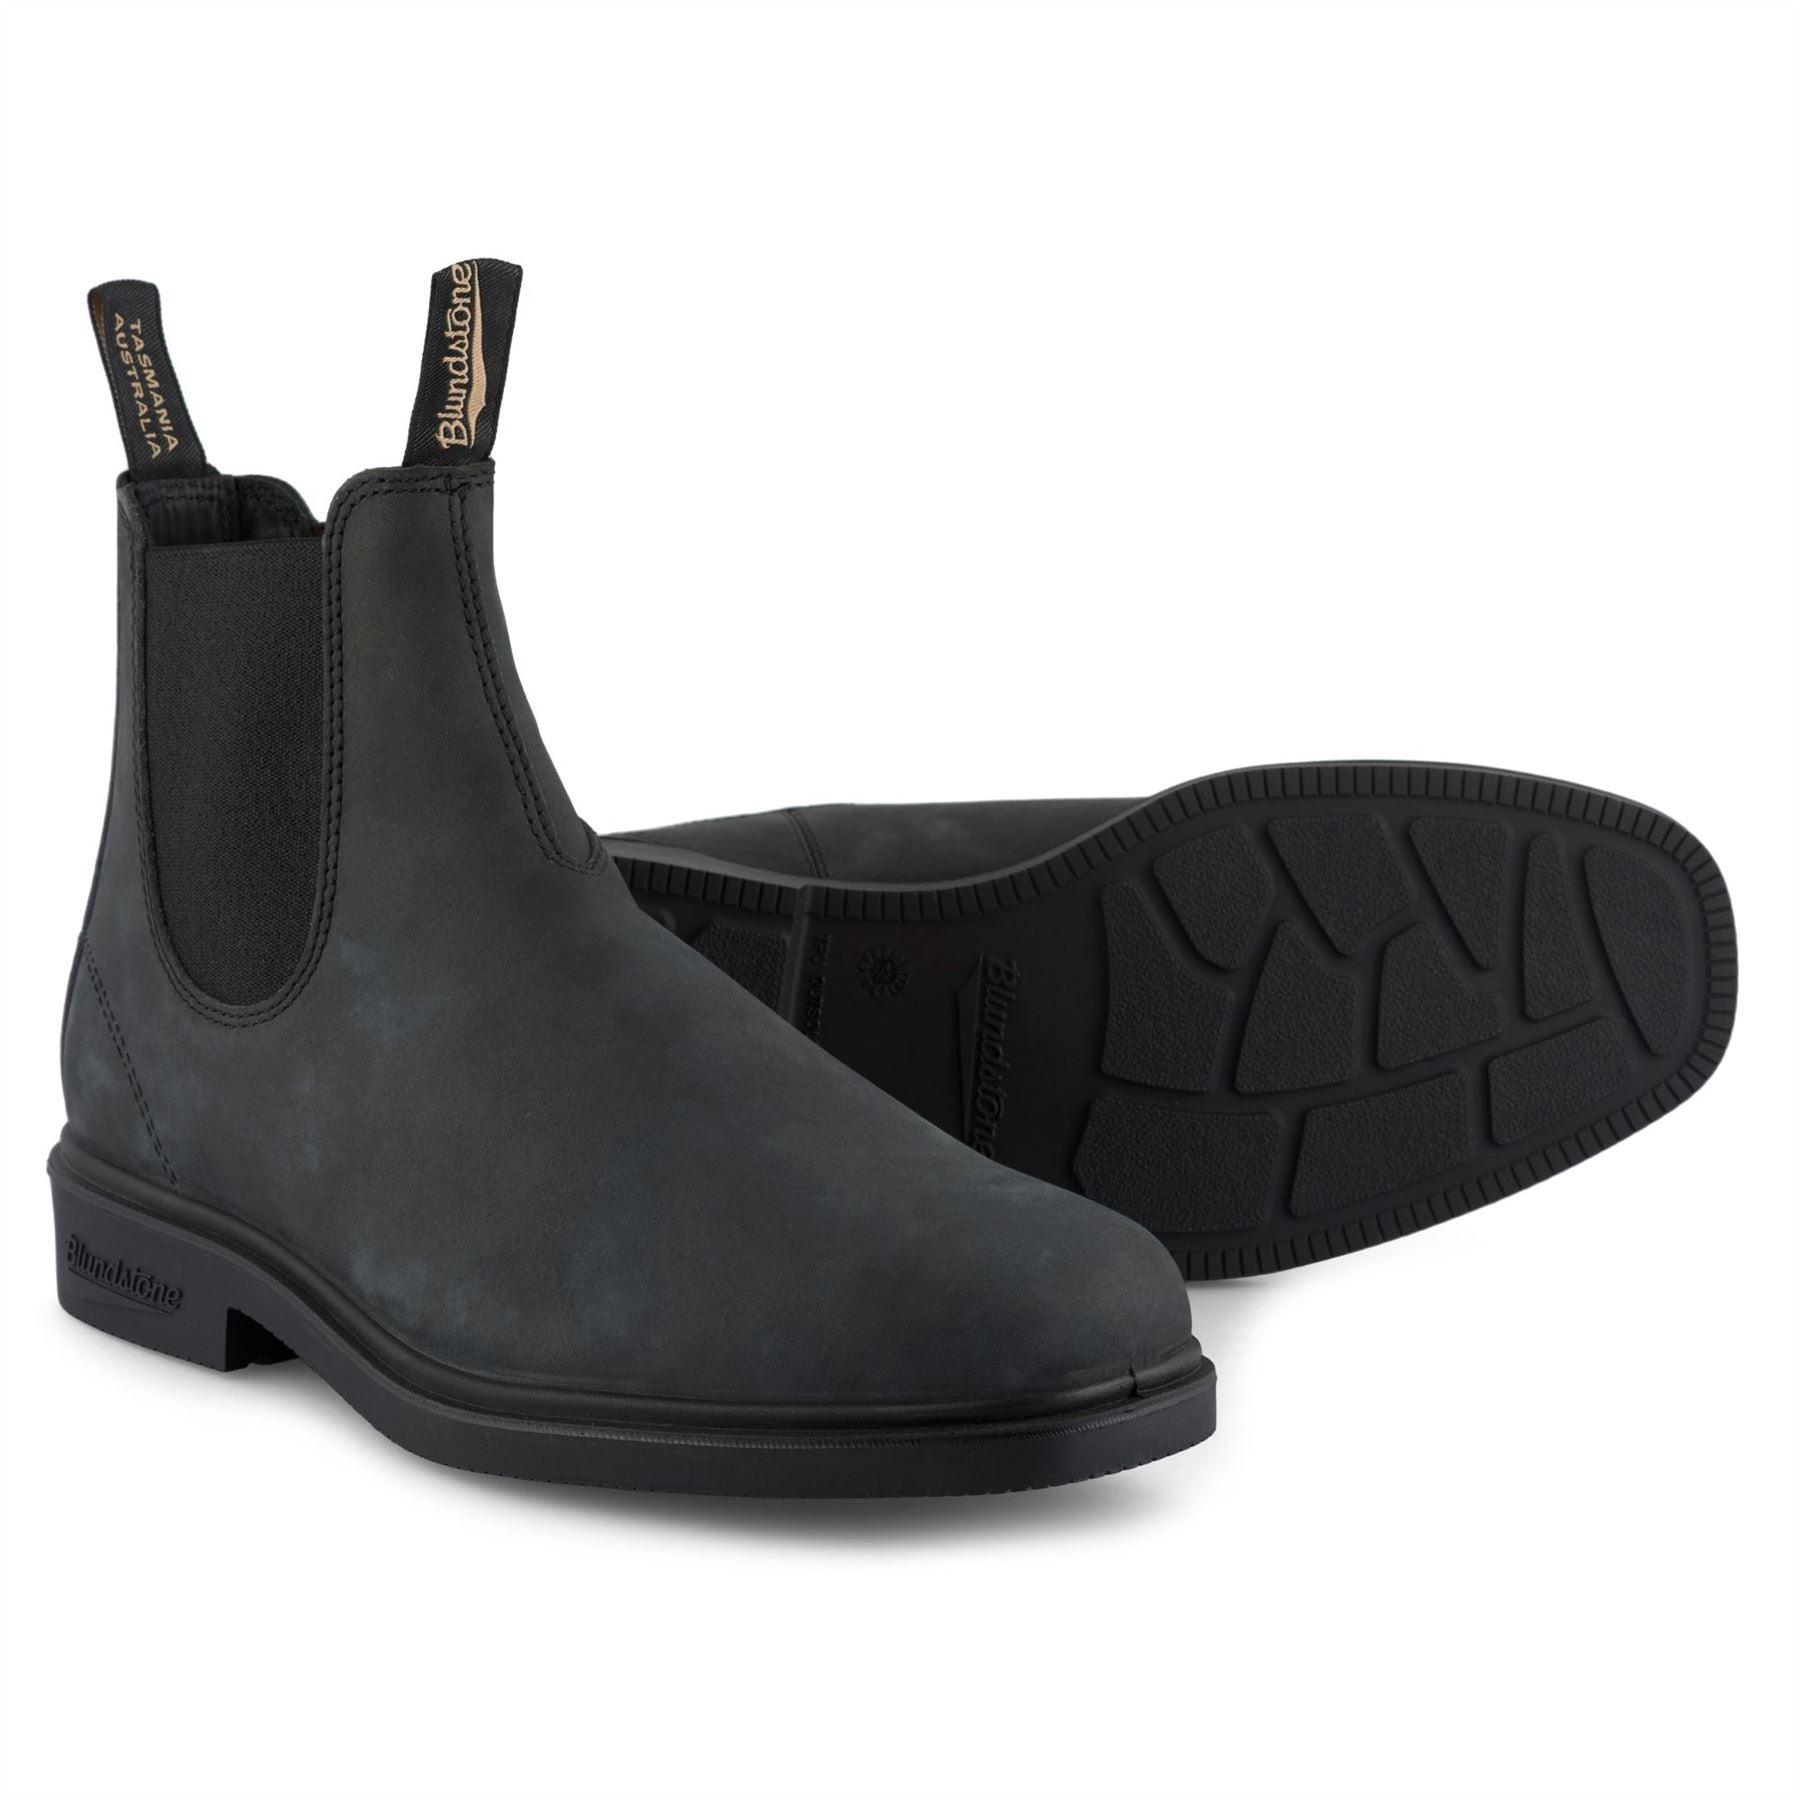 Blundstone 1308 Rustic Black Leather Chiesel Toe Chelsea Boot - Knighthood Store